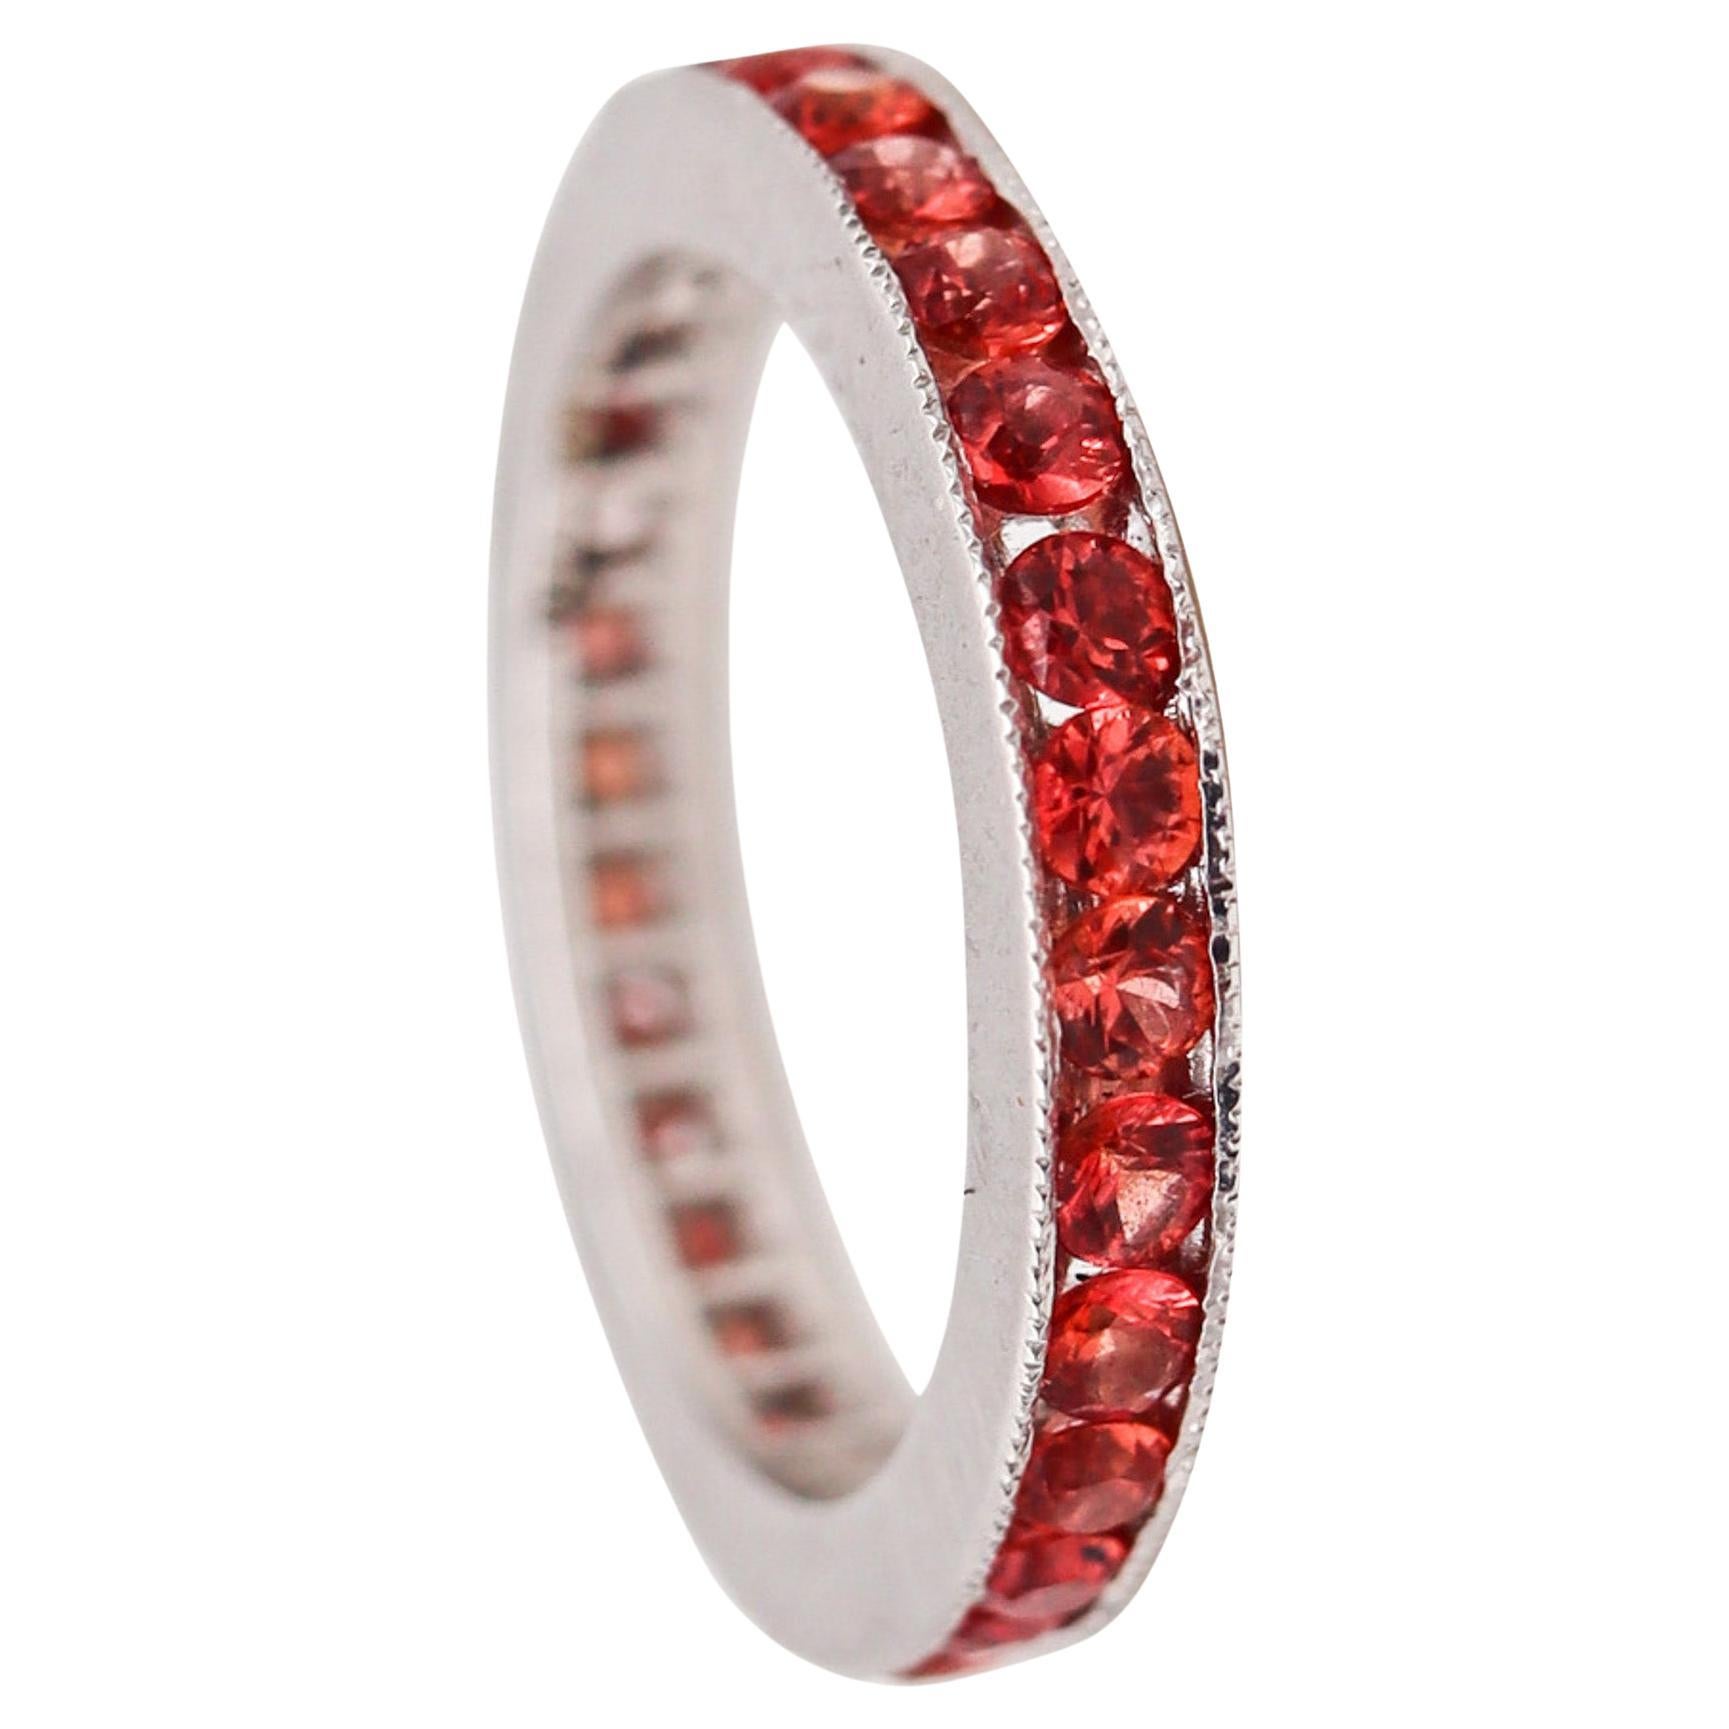 Italian Eternity Ring Band In 18 Kt White Gold With 1.68 Ctw In Reddish Sapphire For Sale